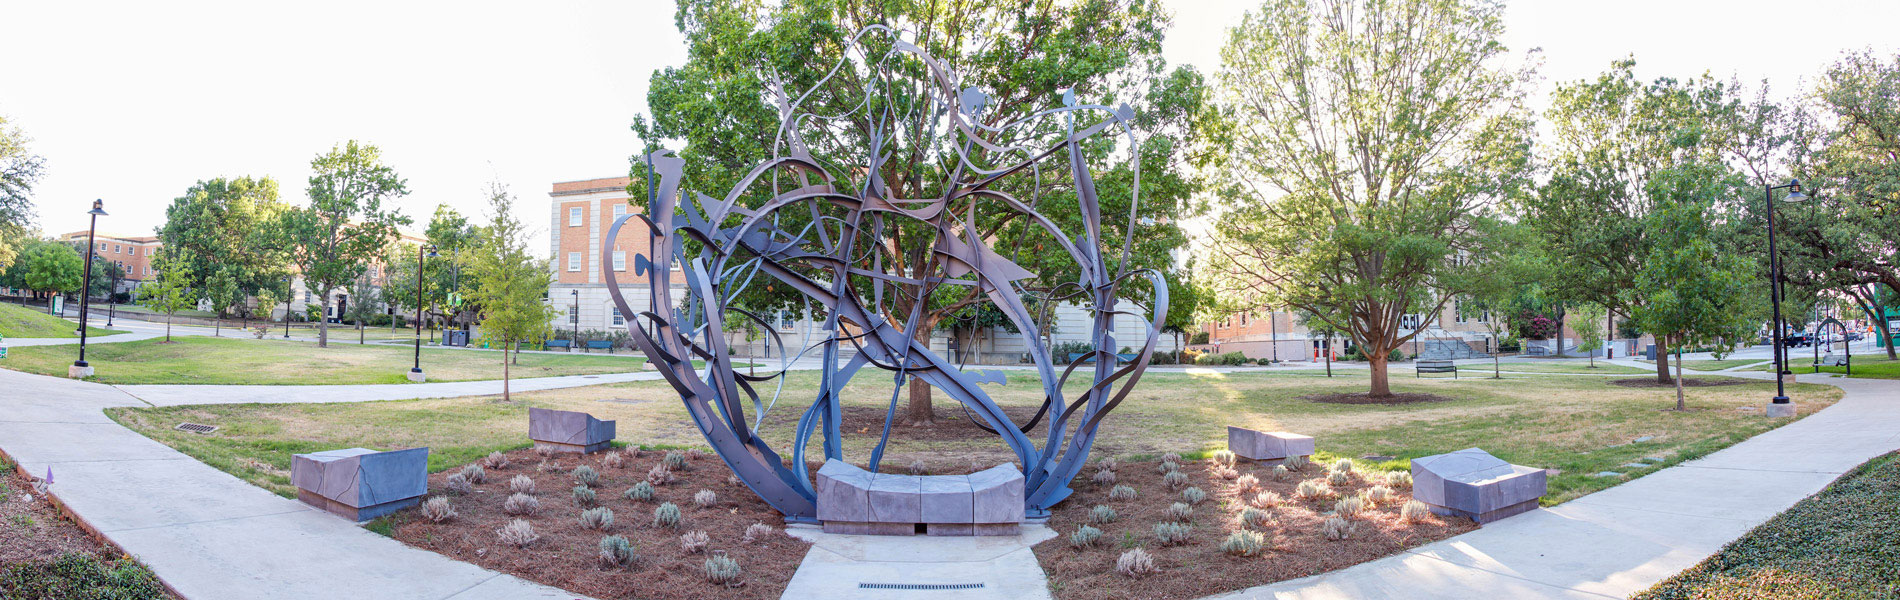 Wide outdoor view of the Art Building's west lawn with the 20' tall abstract sculpture in the center